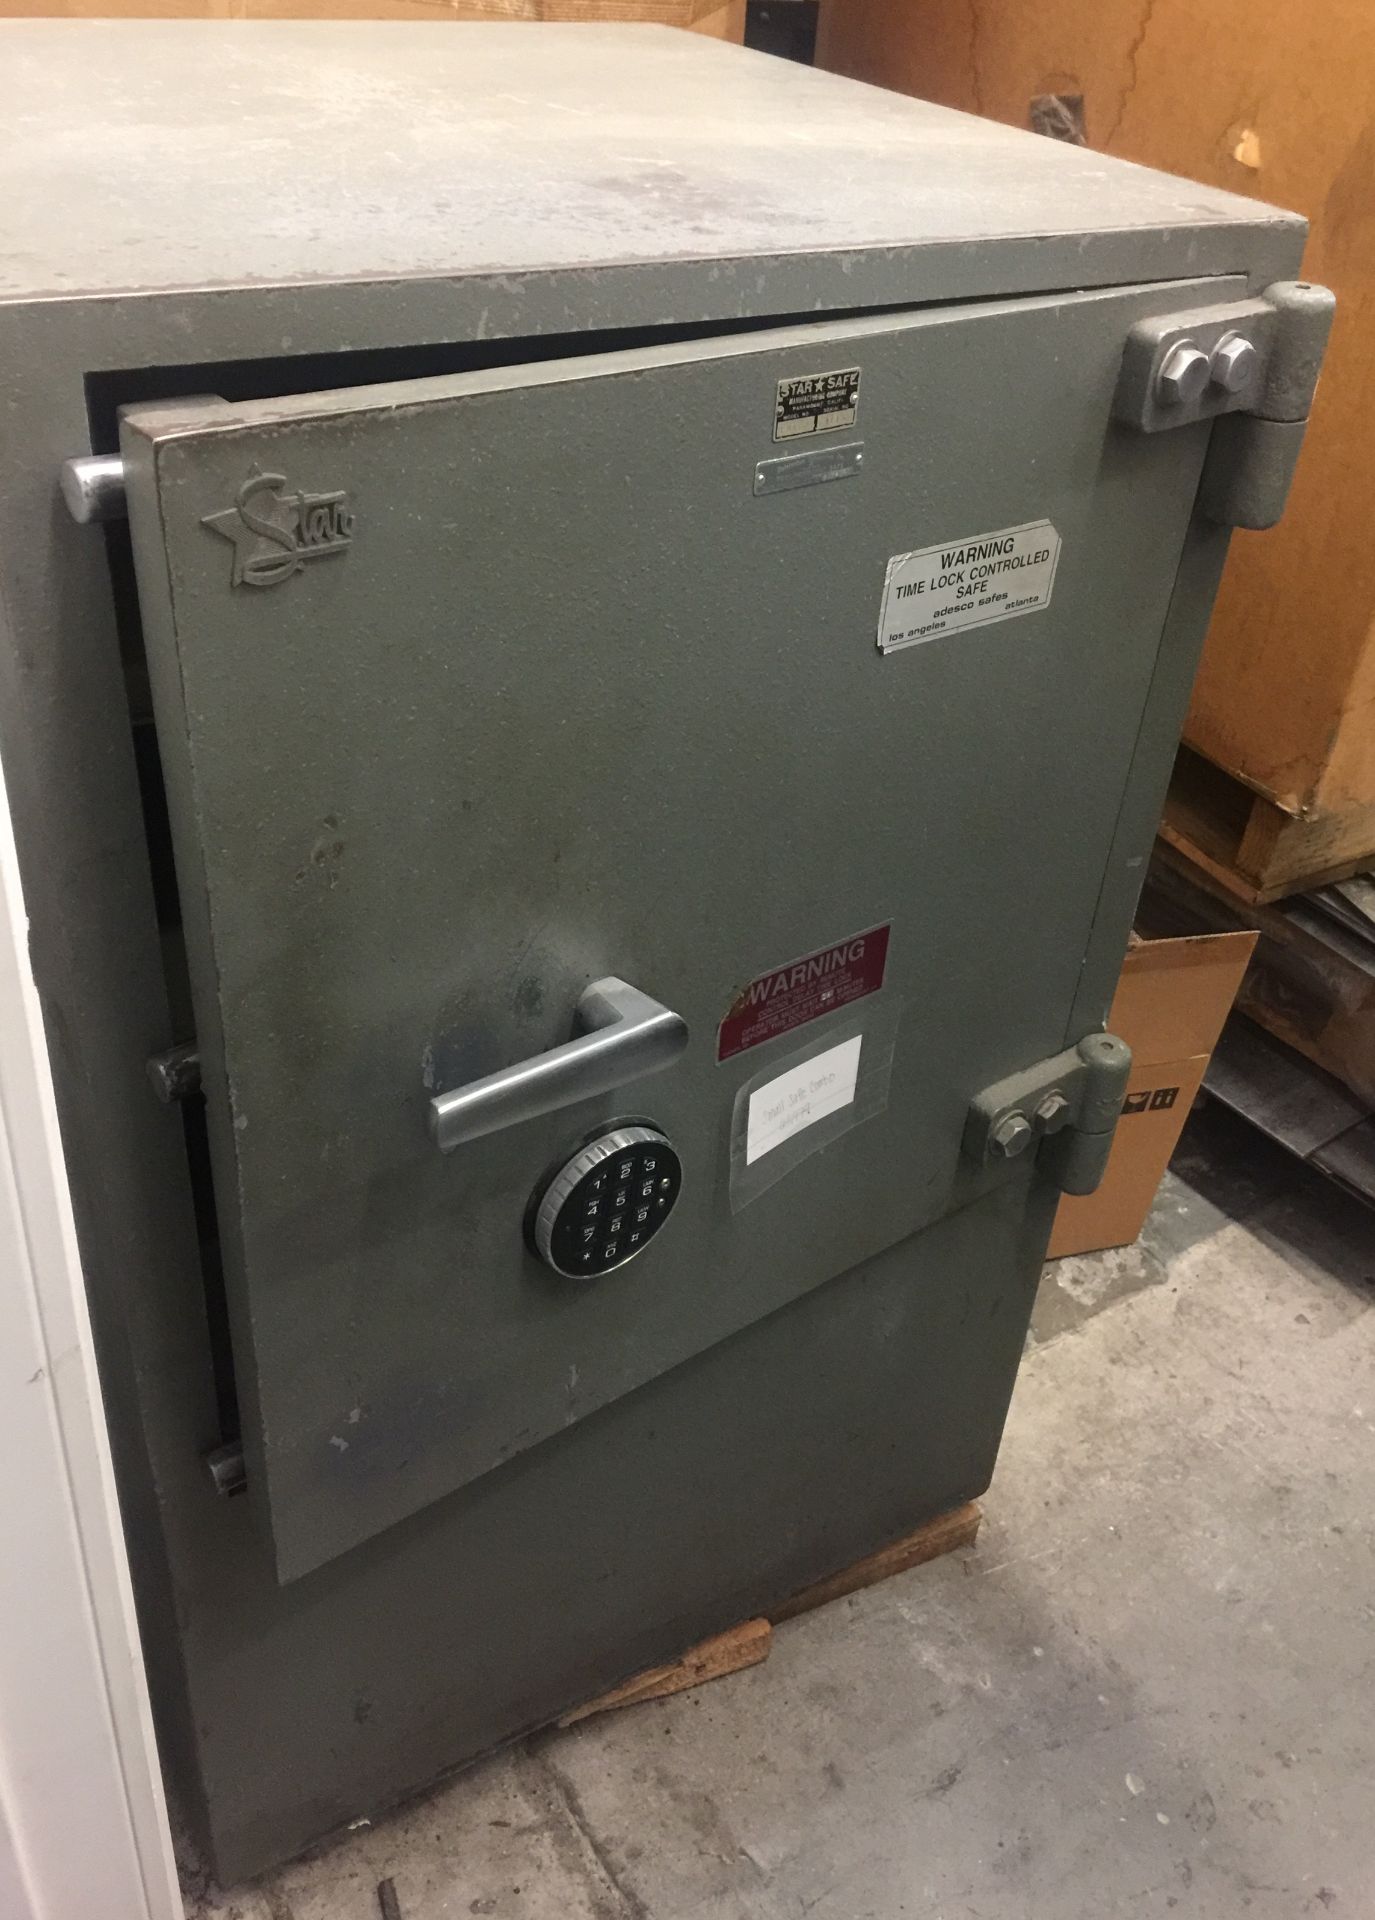 VERY LARGE STAR SAFE WITH COMBO / FIRE PROOF / 15 MIN OPEN TIMMER FROM BANK